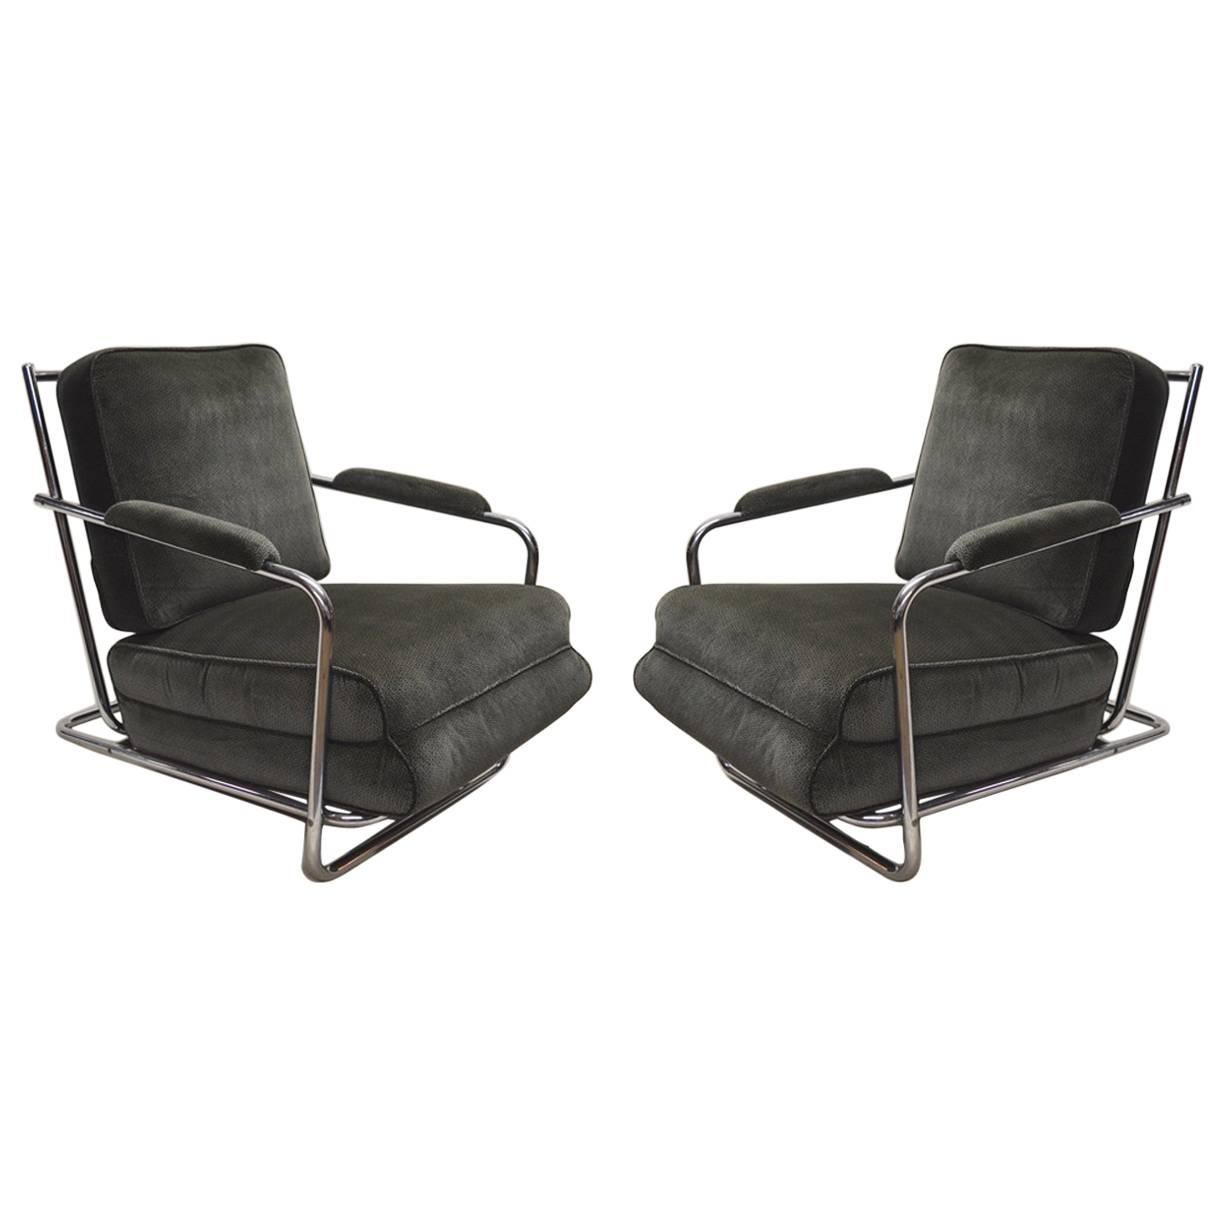 Pair of Lounge Chairs by Gilbert Rohde, USA Circa 1935